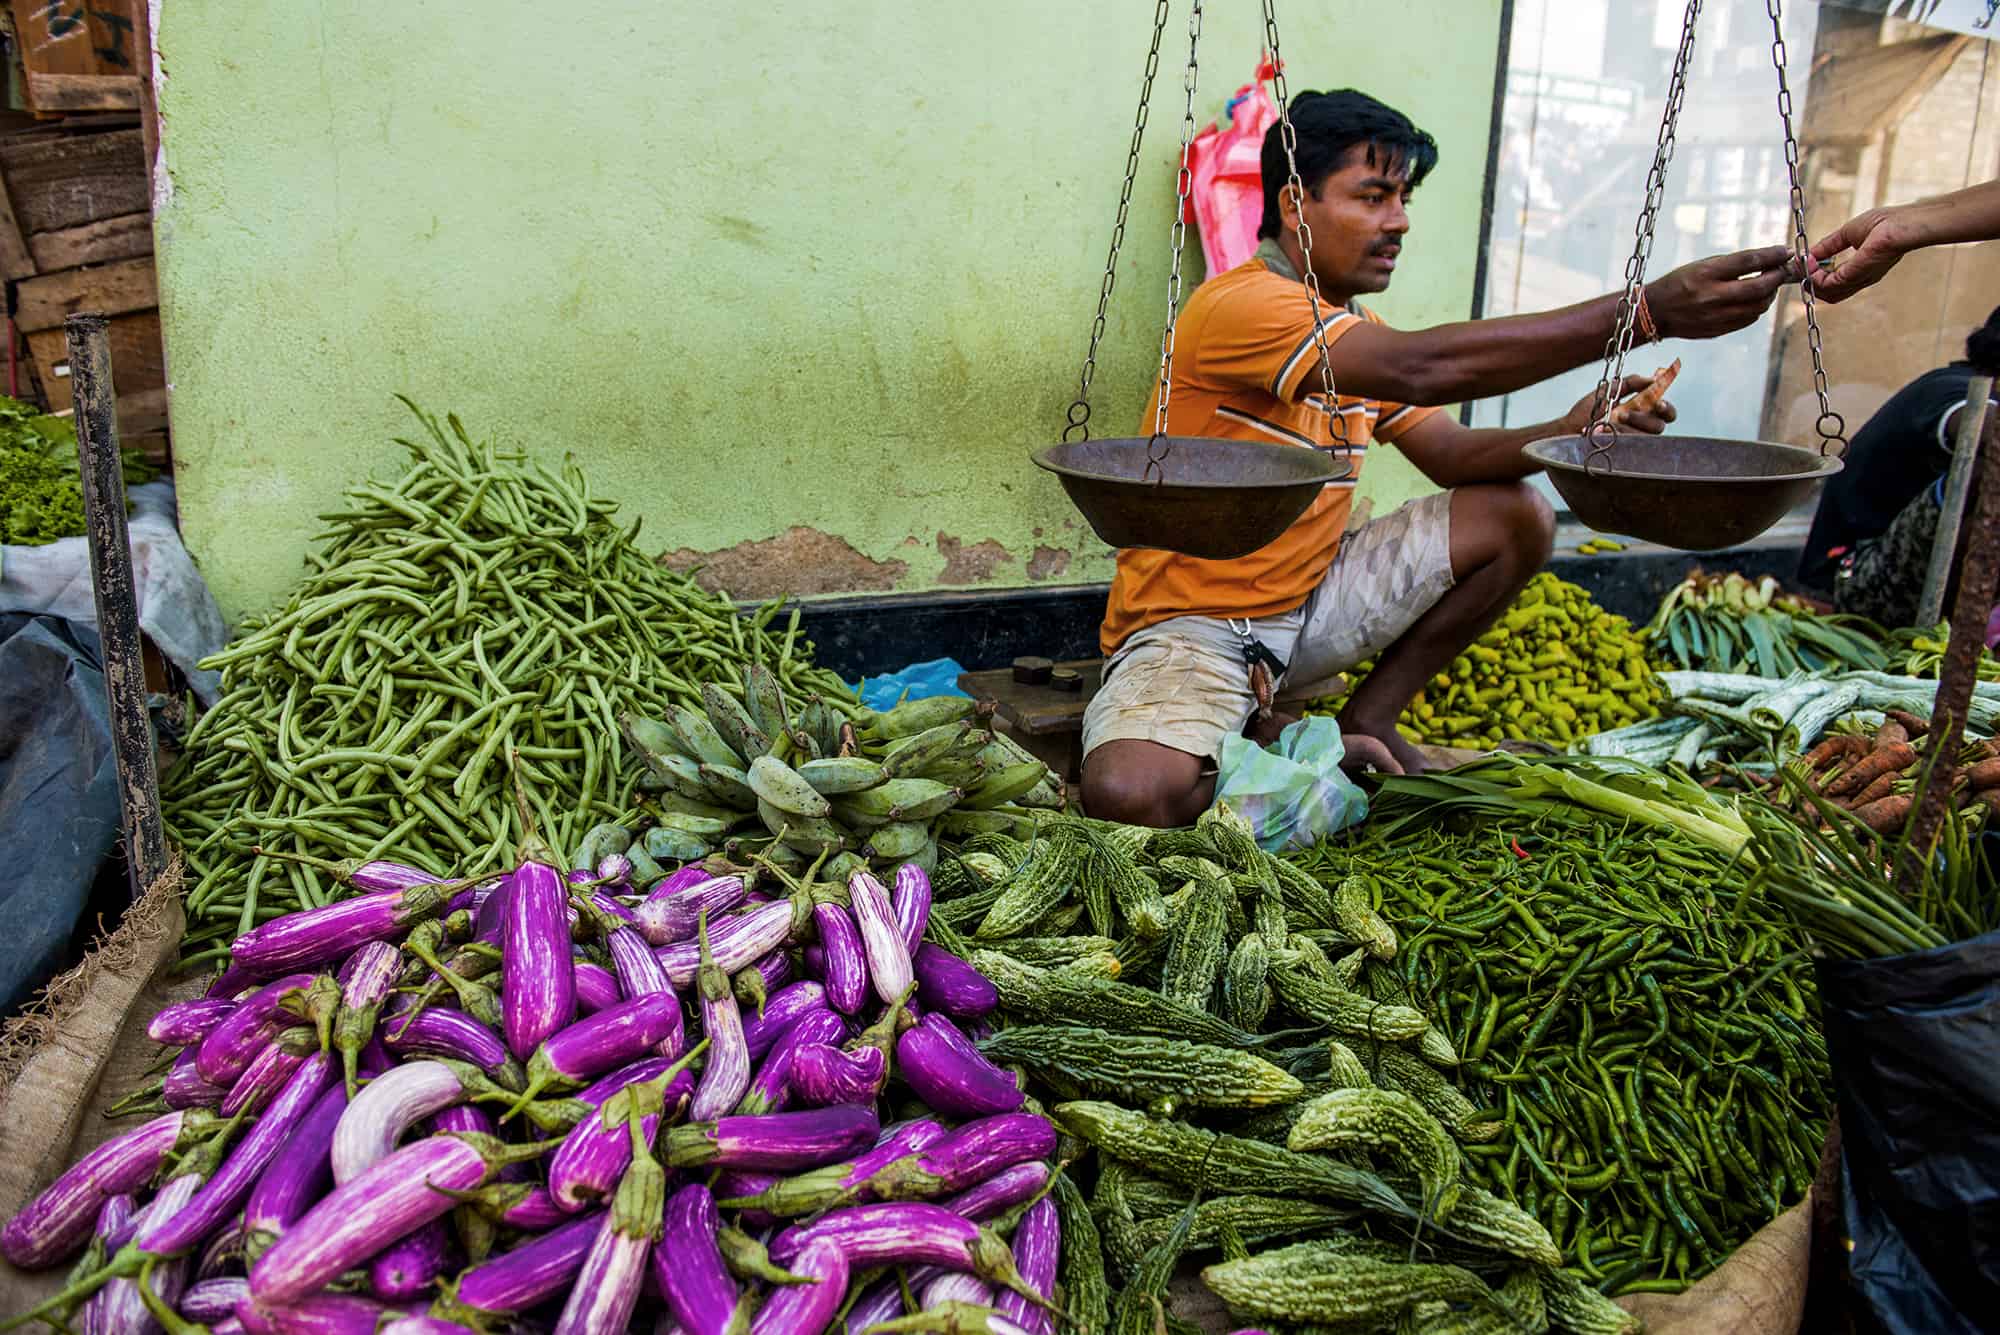 Local trader in a vegetable market near Galle